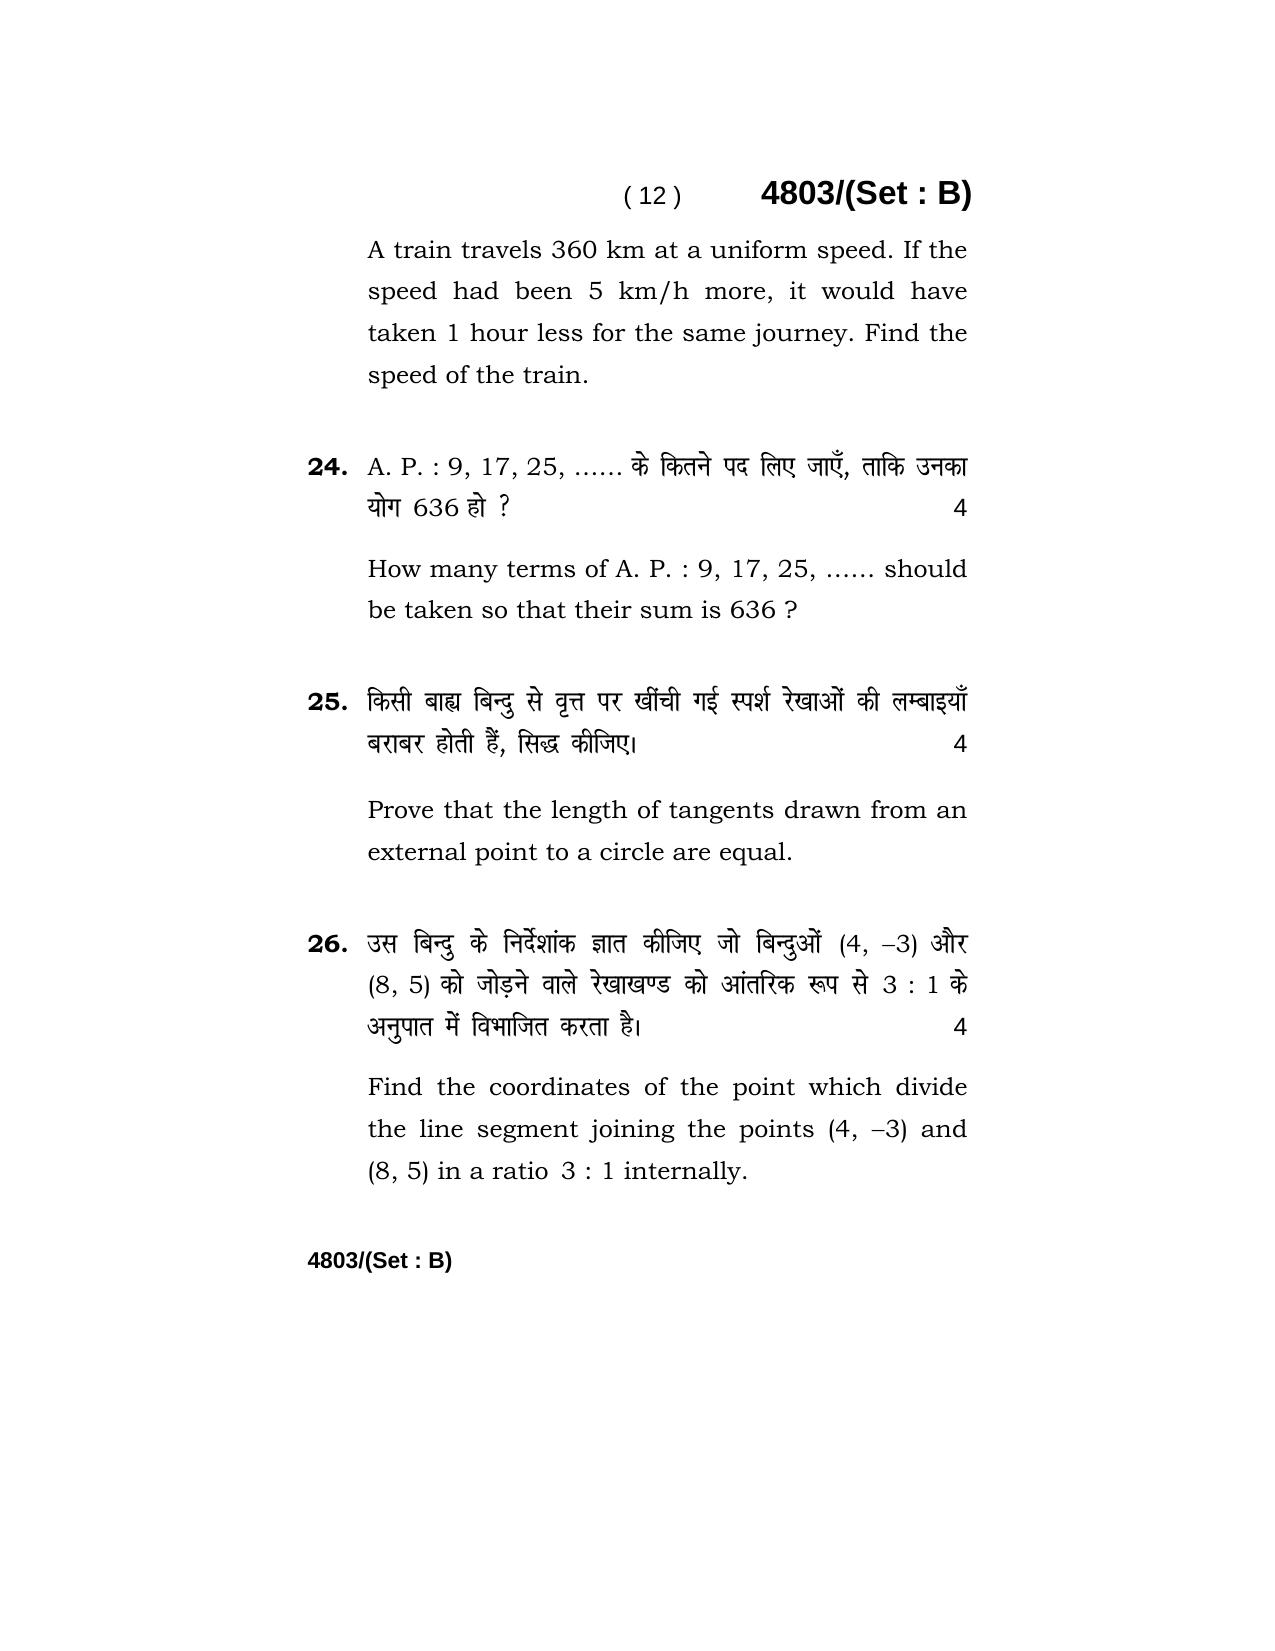 Haryana Board HBSE Class 10 Mathematics 2020 Question Paper - Page 28